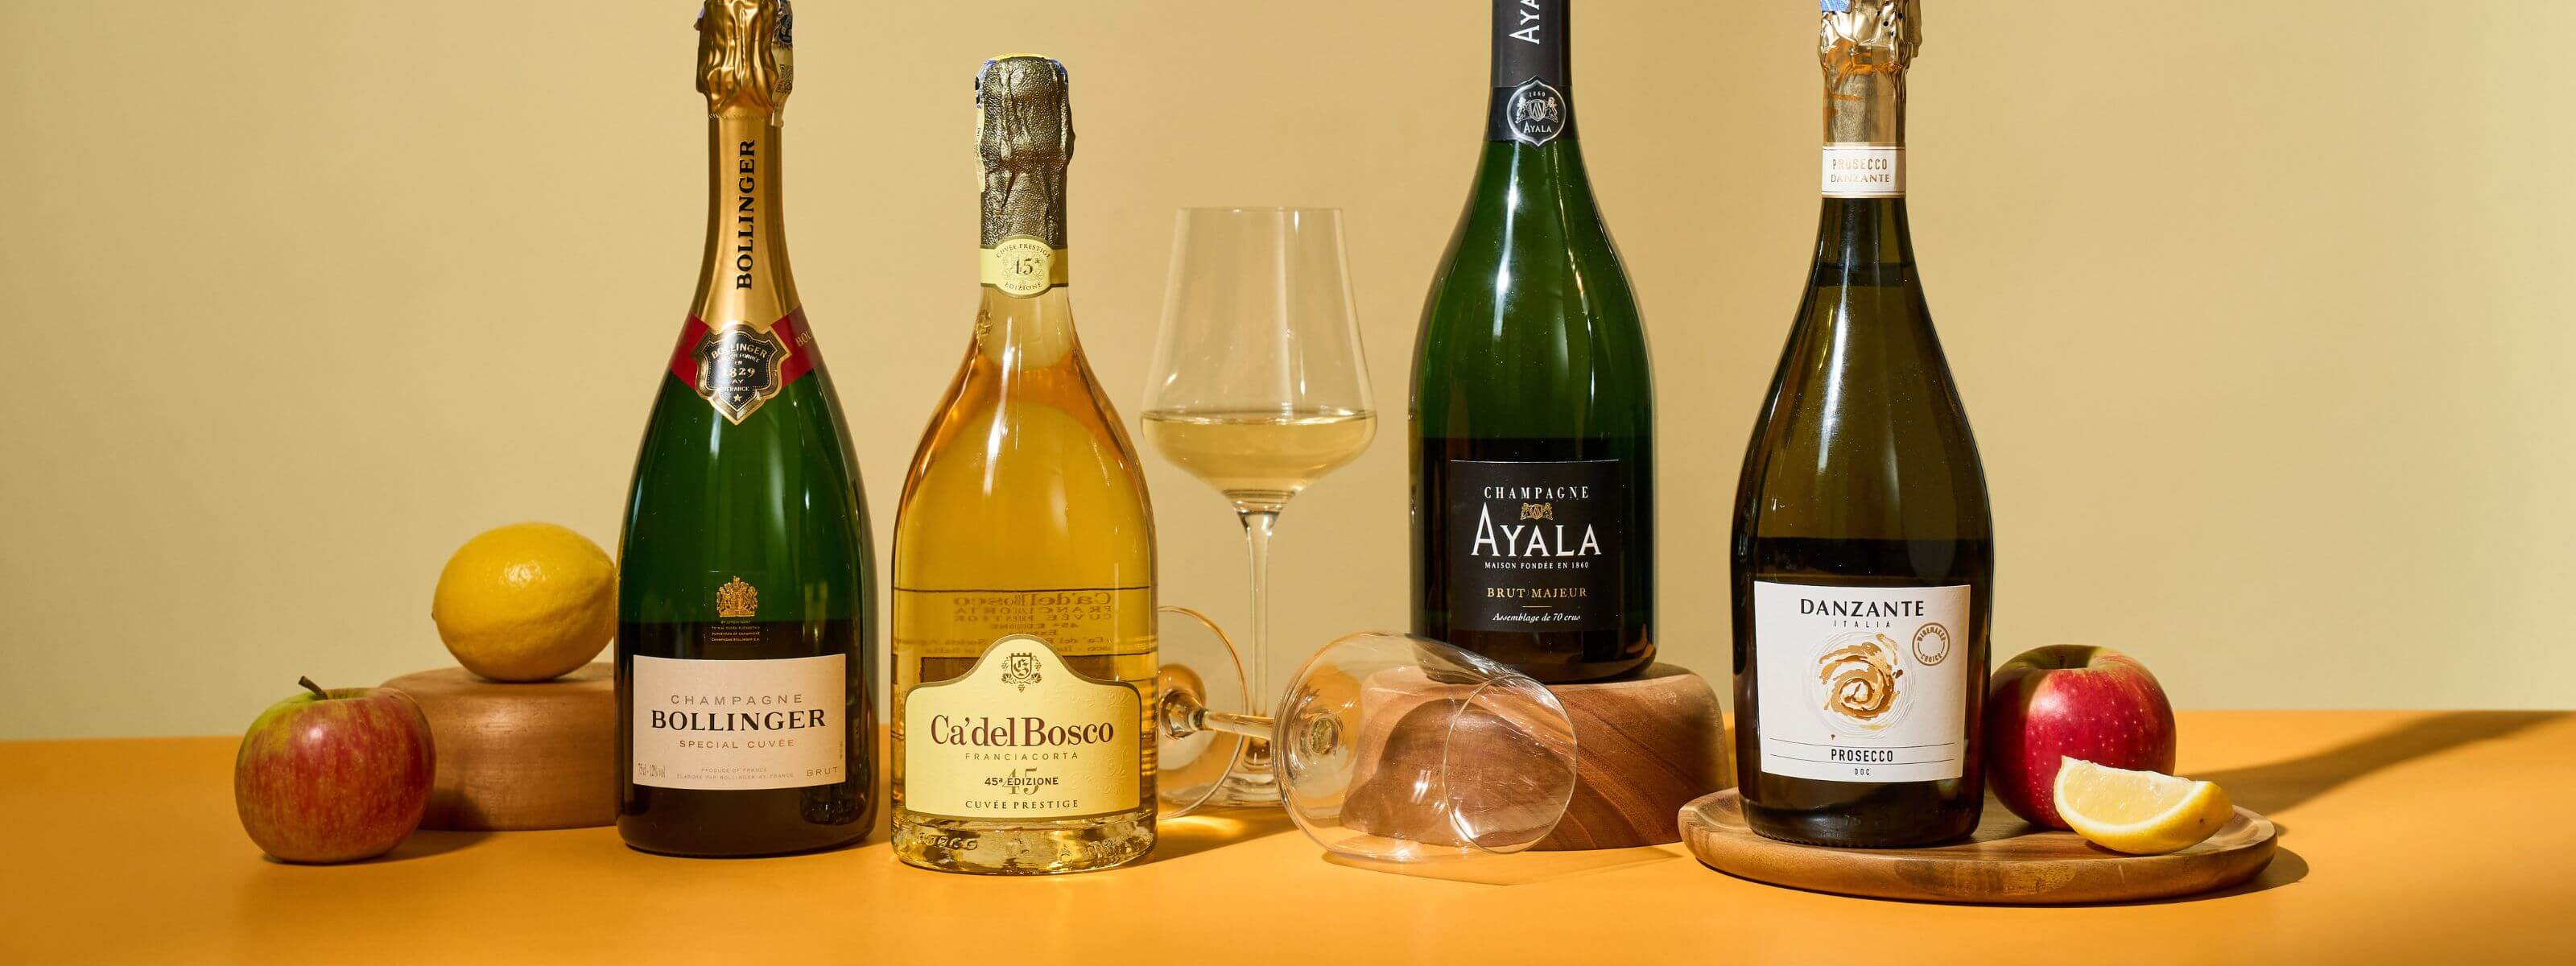 Our selection of sparkling wines and champagnes, featuring champagne houses like Bollinger, Ayala and Ca' del Bosco.